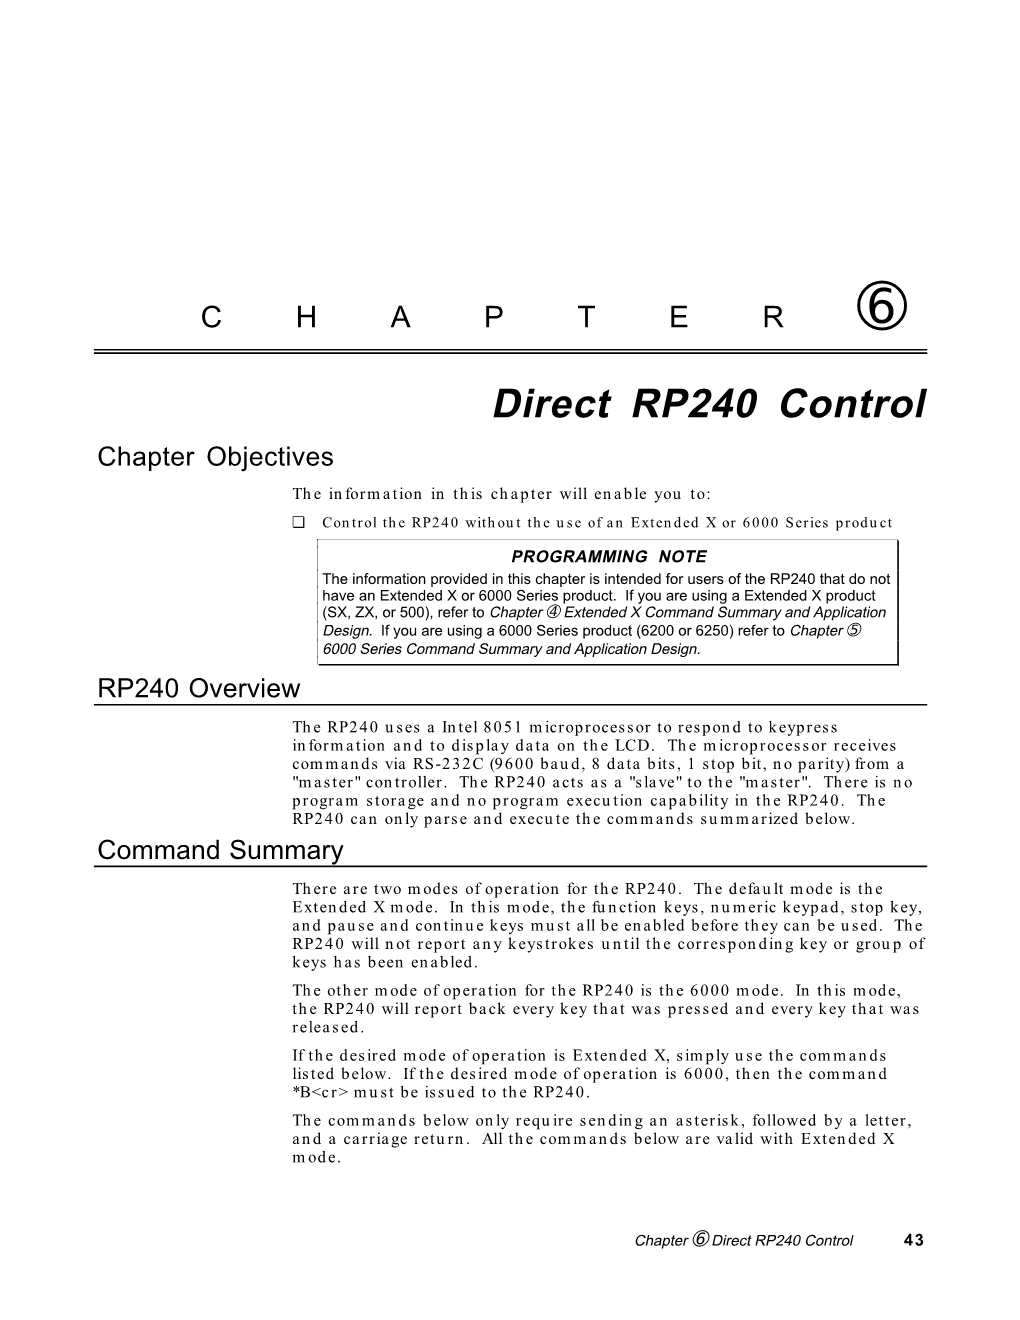 Direct RP240 Control